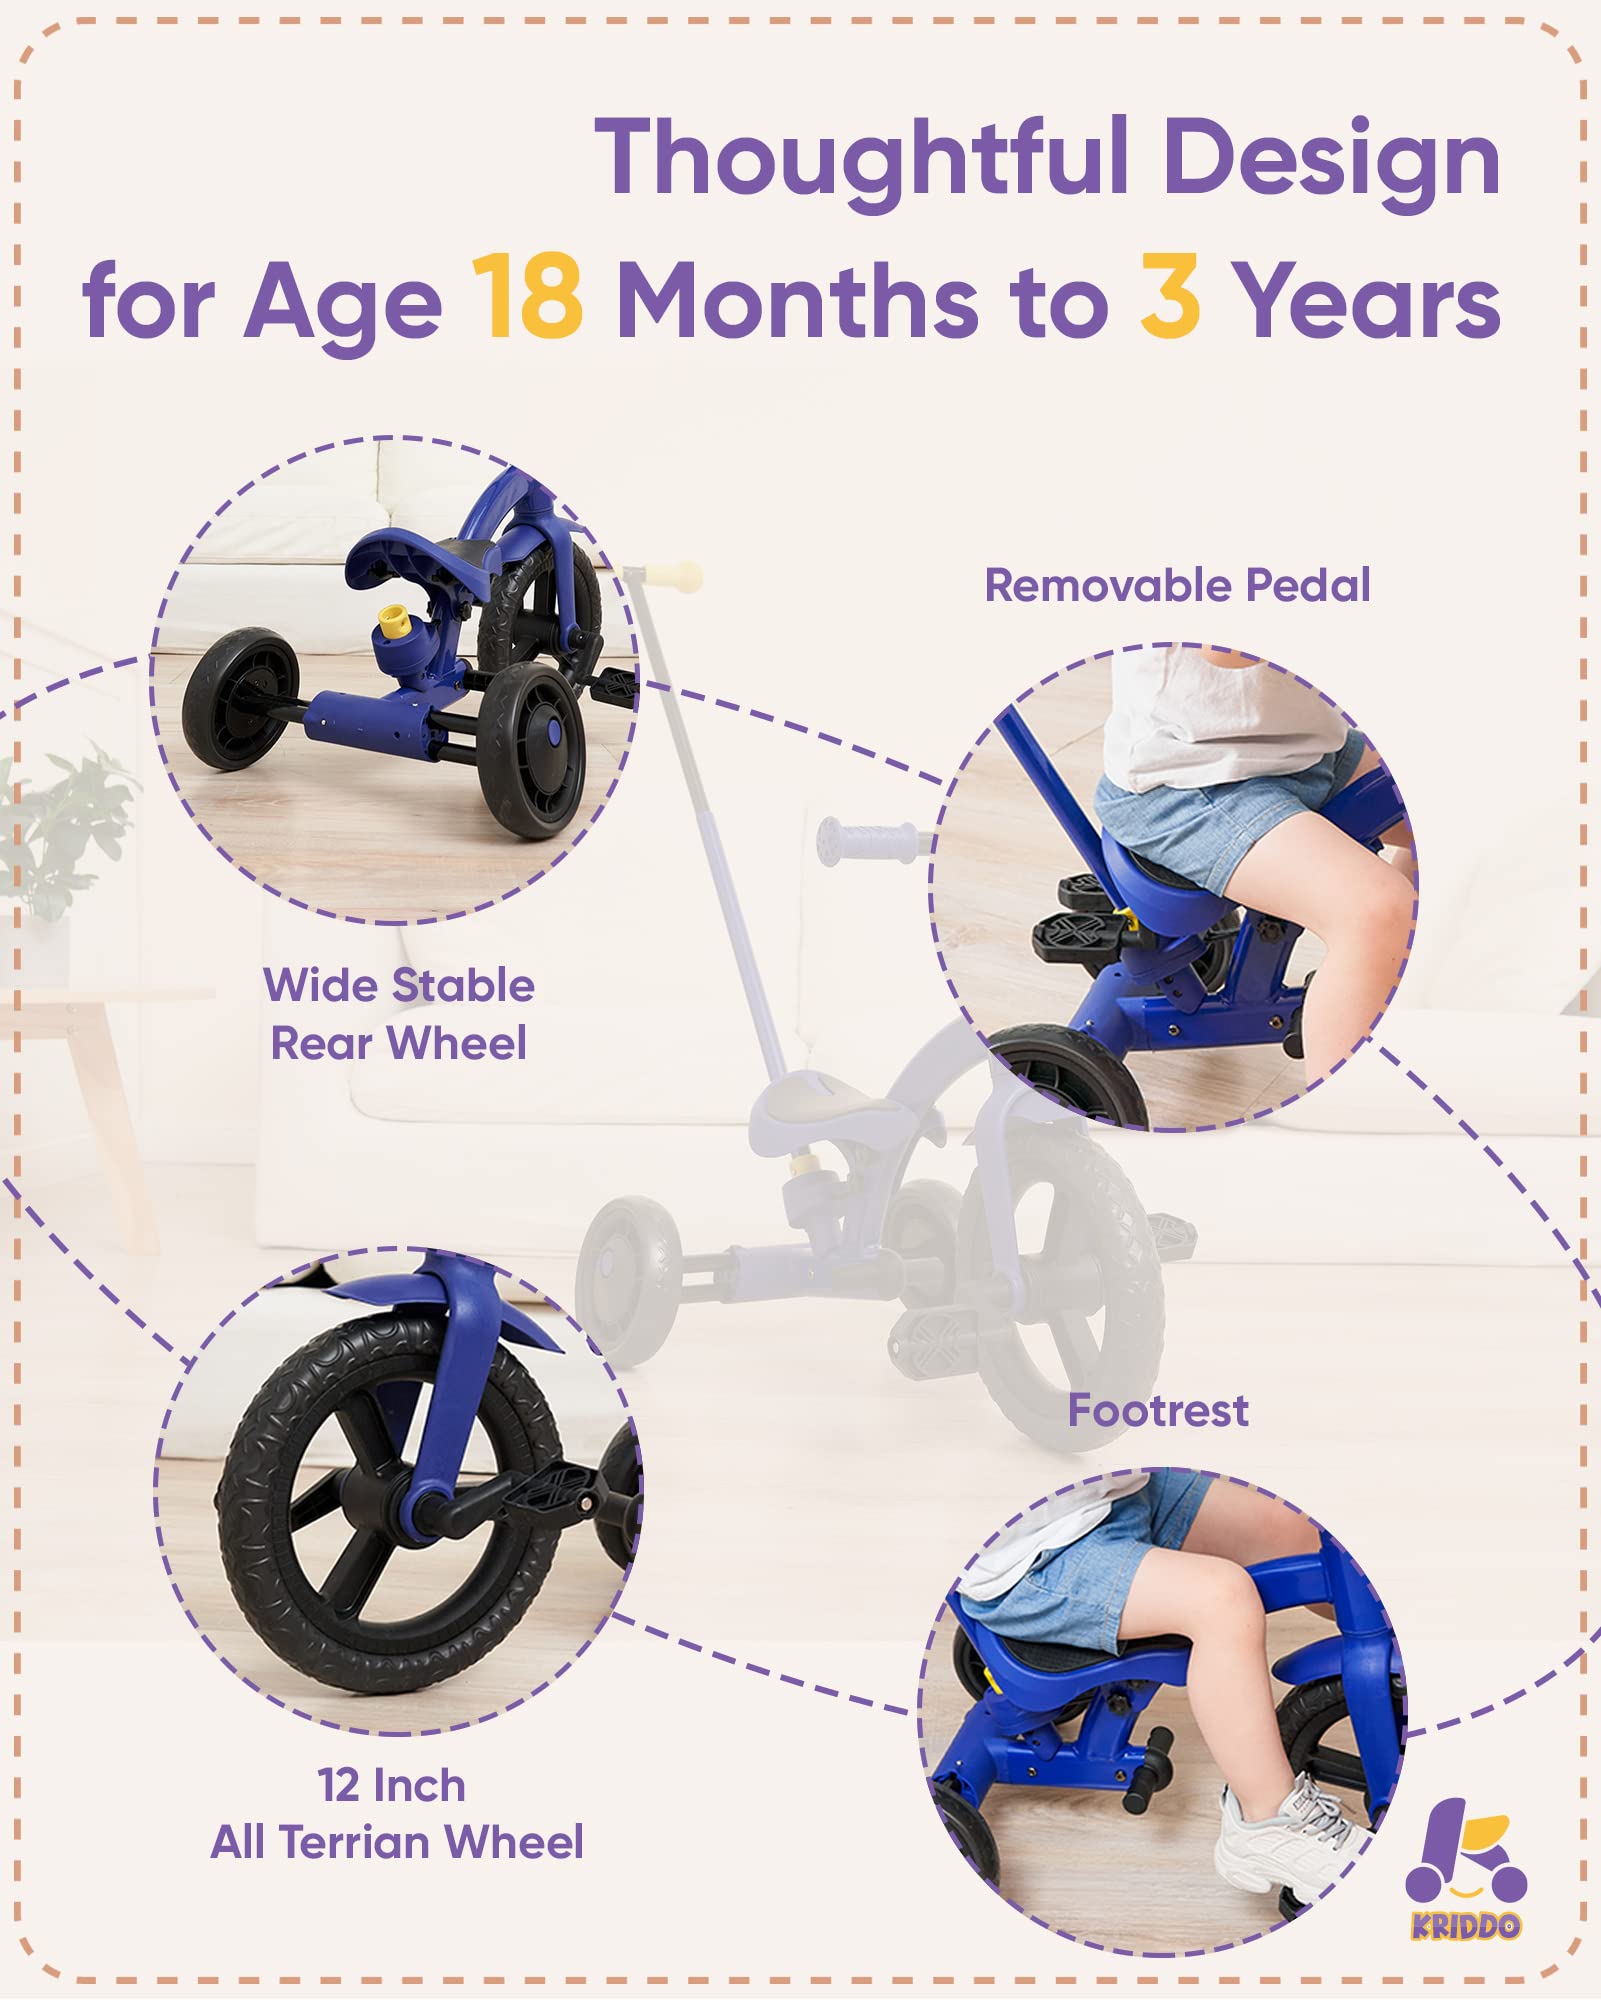 KRIDDO 4-in-1 Kids Tricycle for 1.5 to 3 Yea Old with Parent Steering Push Handle, 12 Inch Front Wheel Trike, Toddler Balance Bike for Boys Girls 18 Month to 3 Years, Adjustable Height, Blue